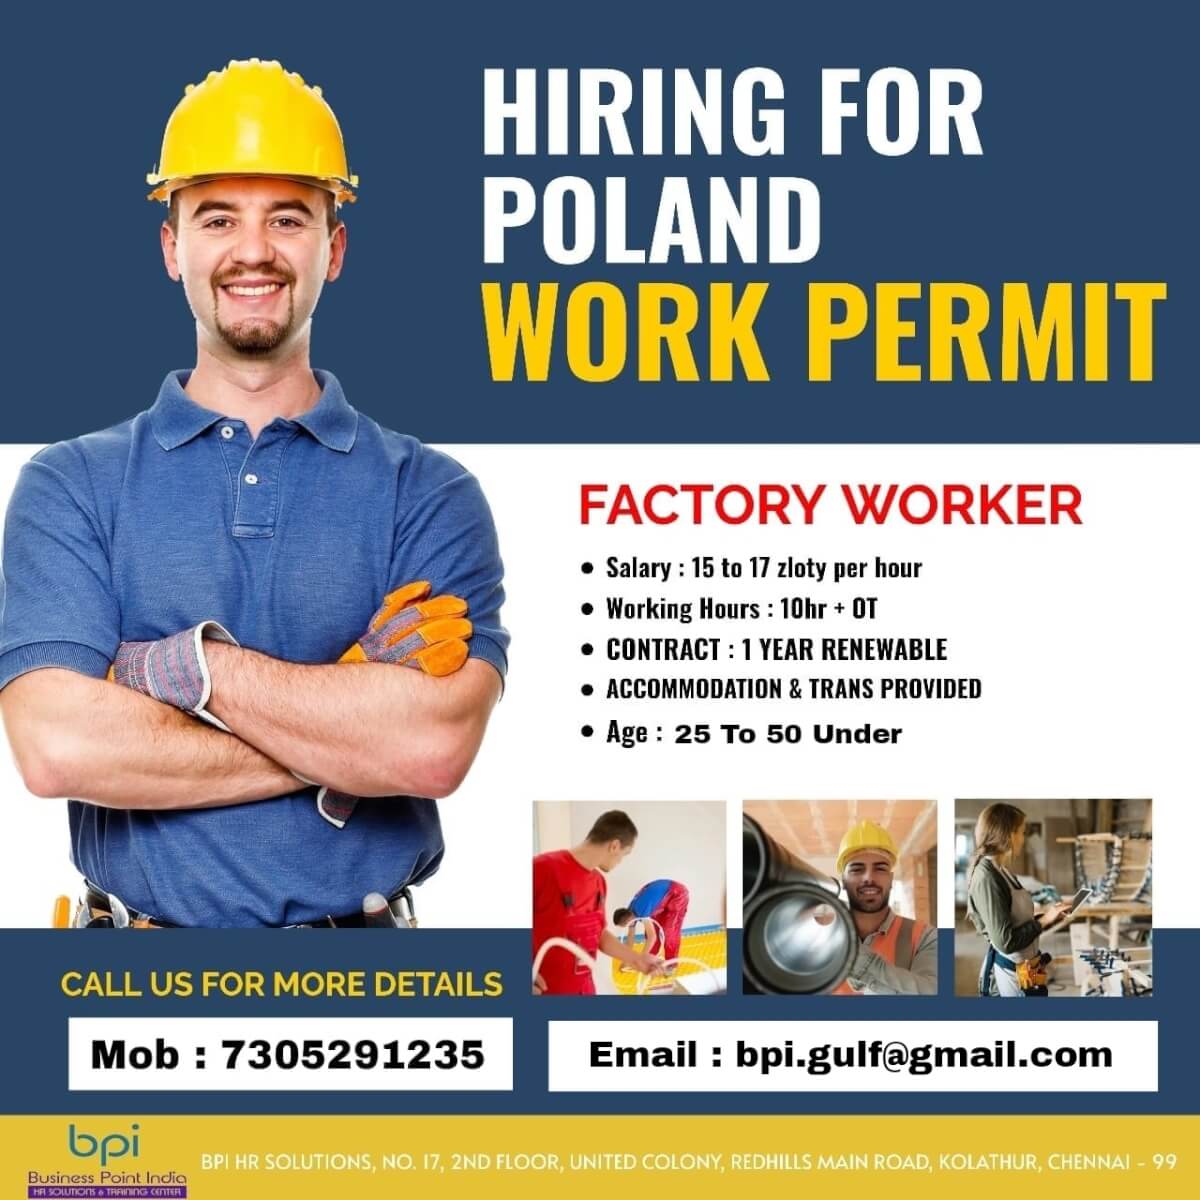 URGENTLY REQURIED FOR A LEADING CO. IN POLAND